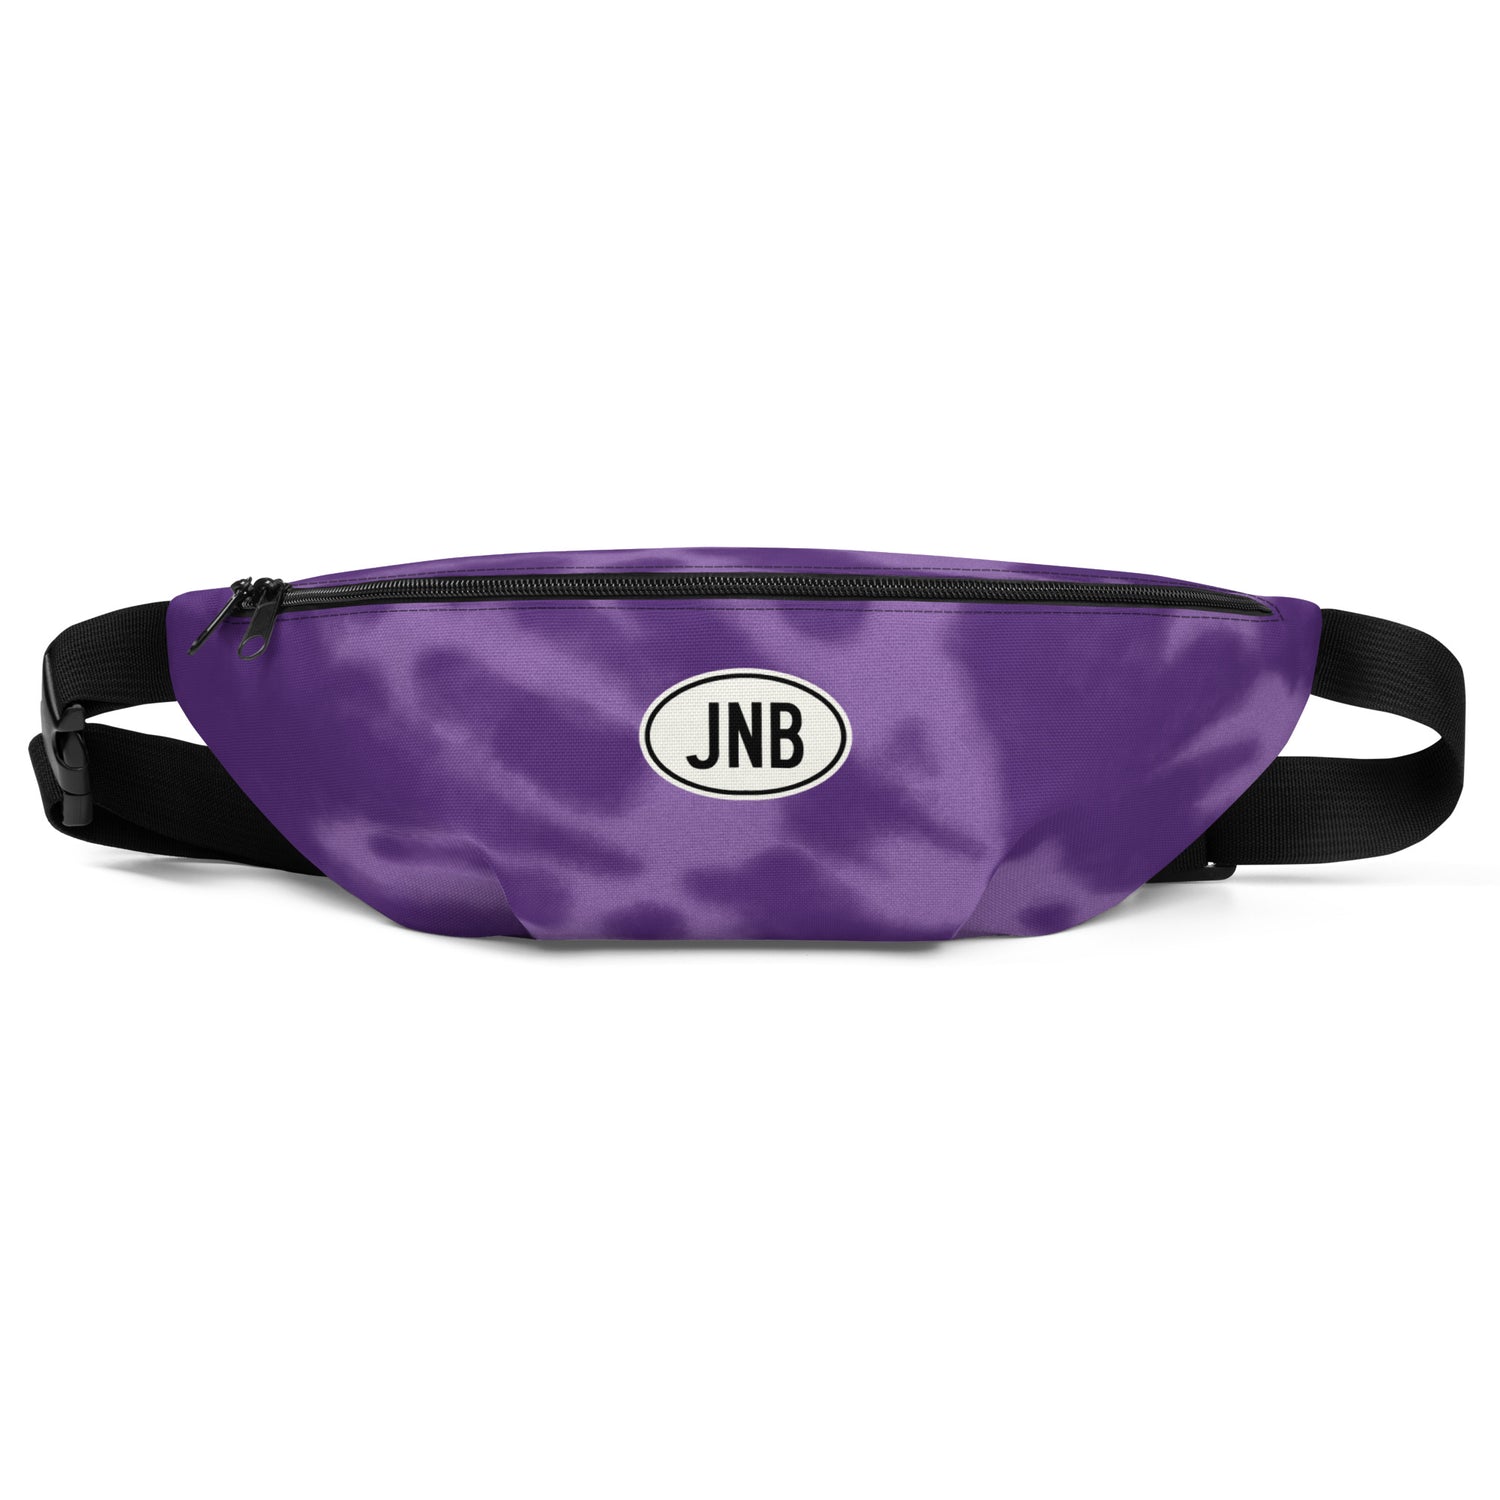 Johannesburg South Africa Backpacks, Fanny Packs and Tote Bags • JNB Airport Code